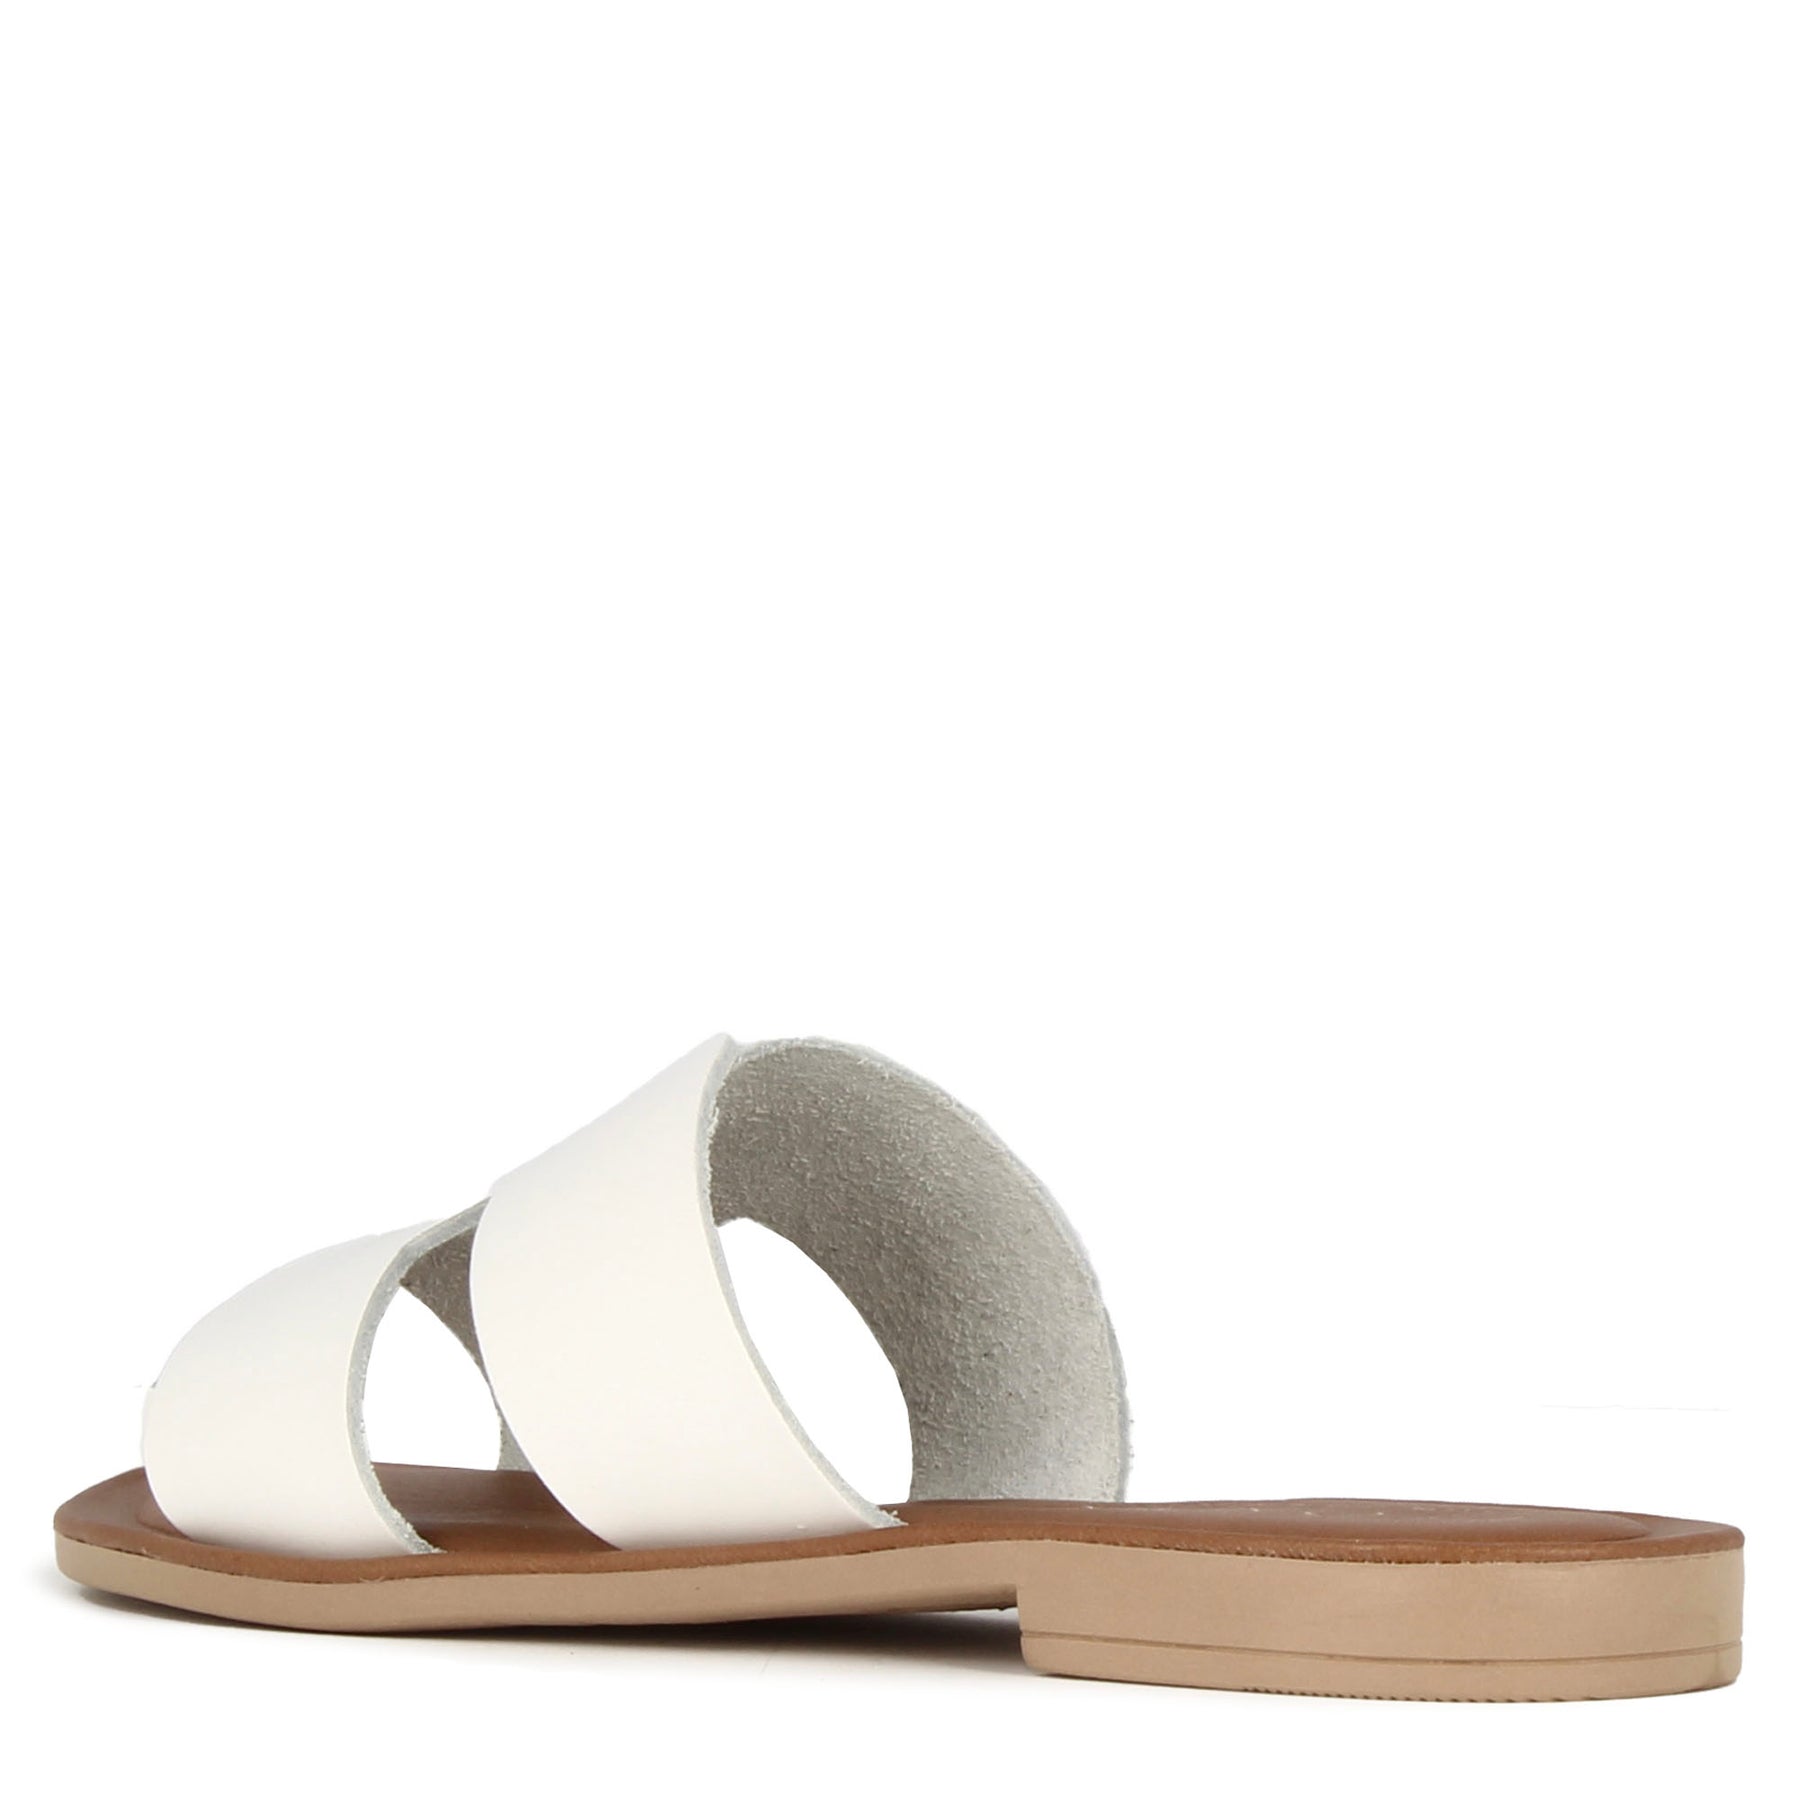 White and brown leather women's slippers